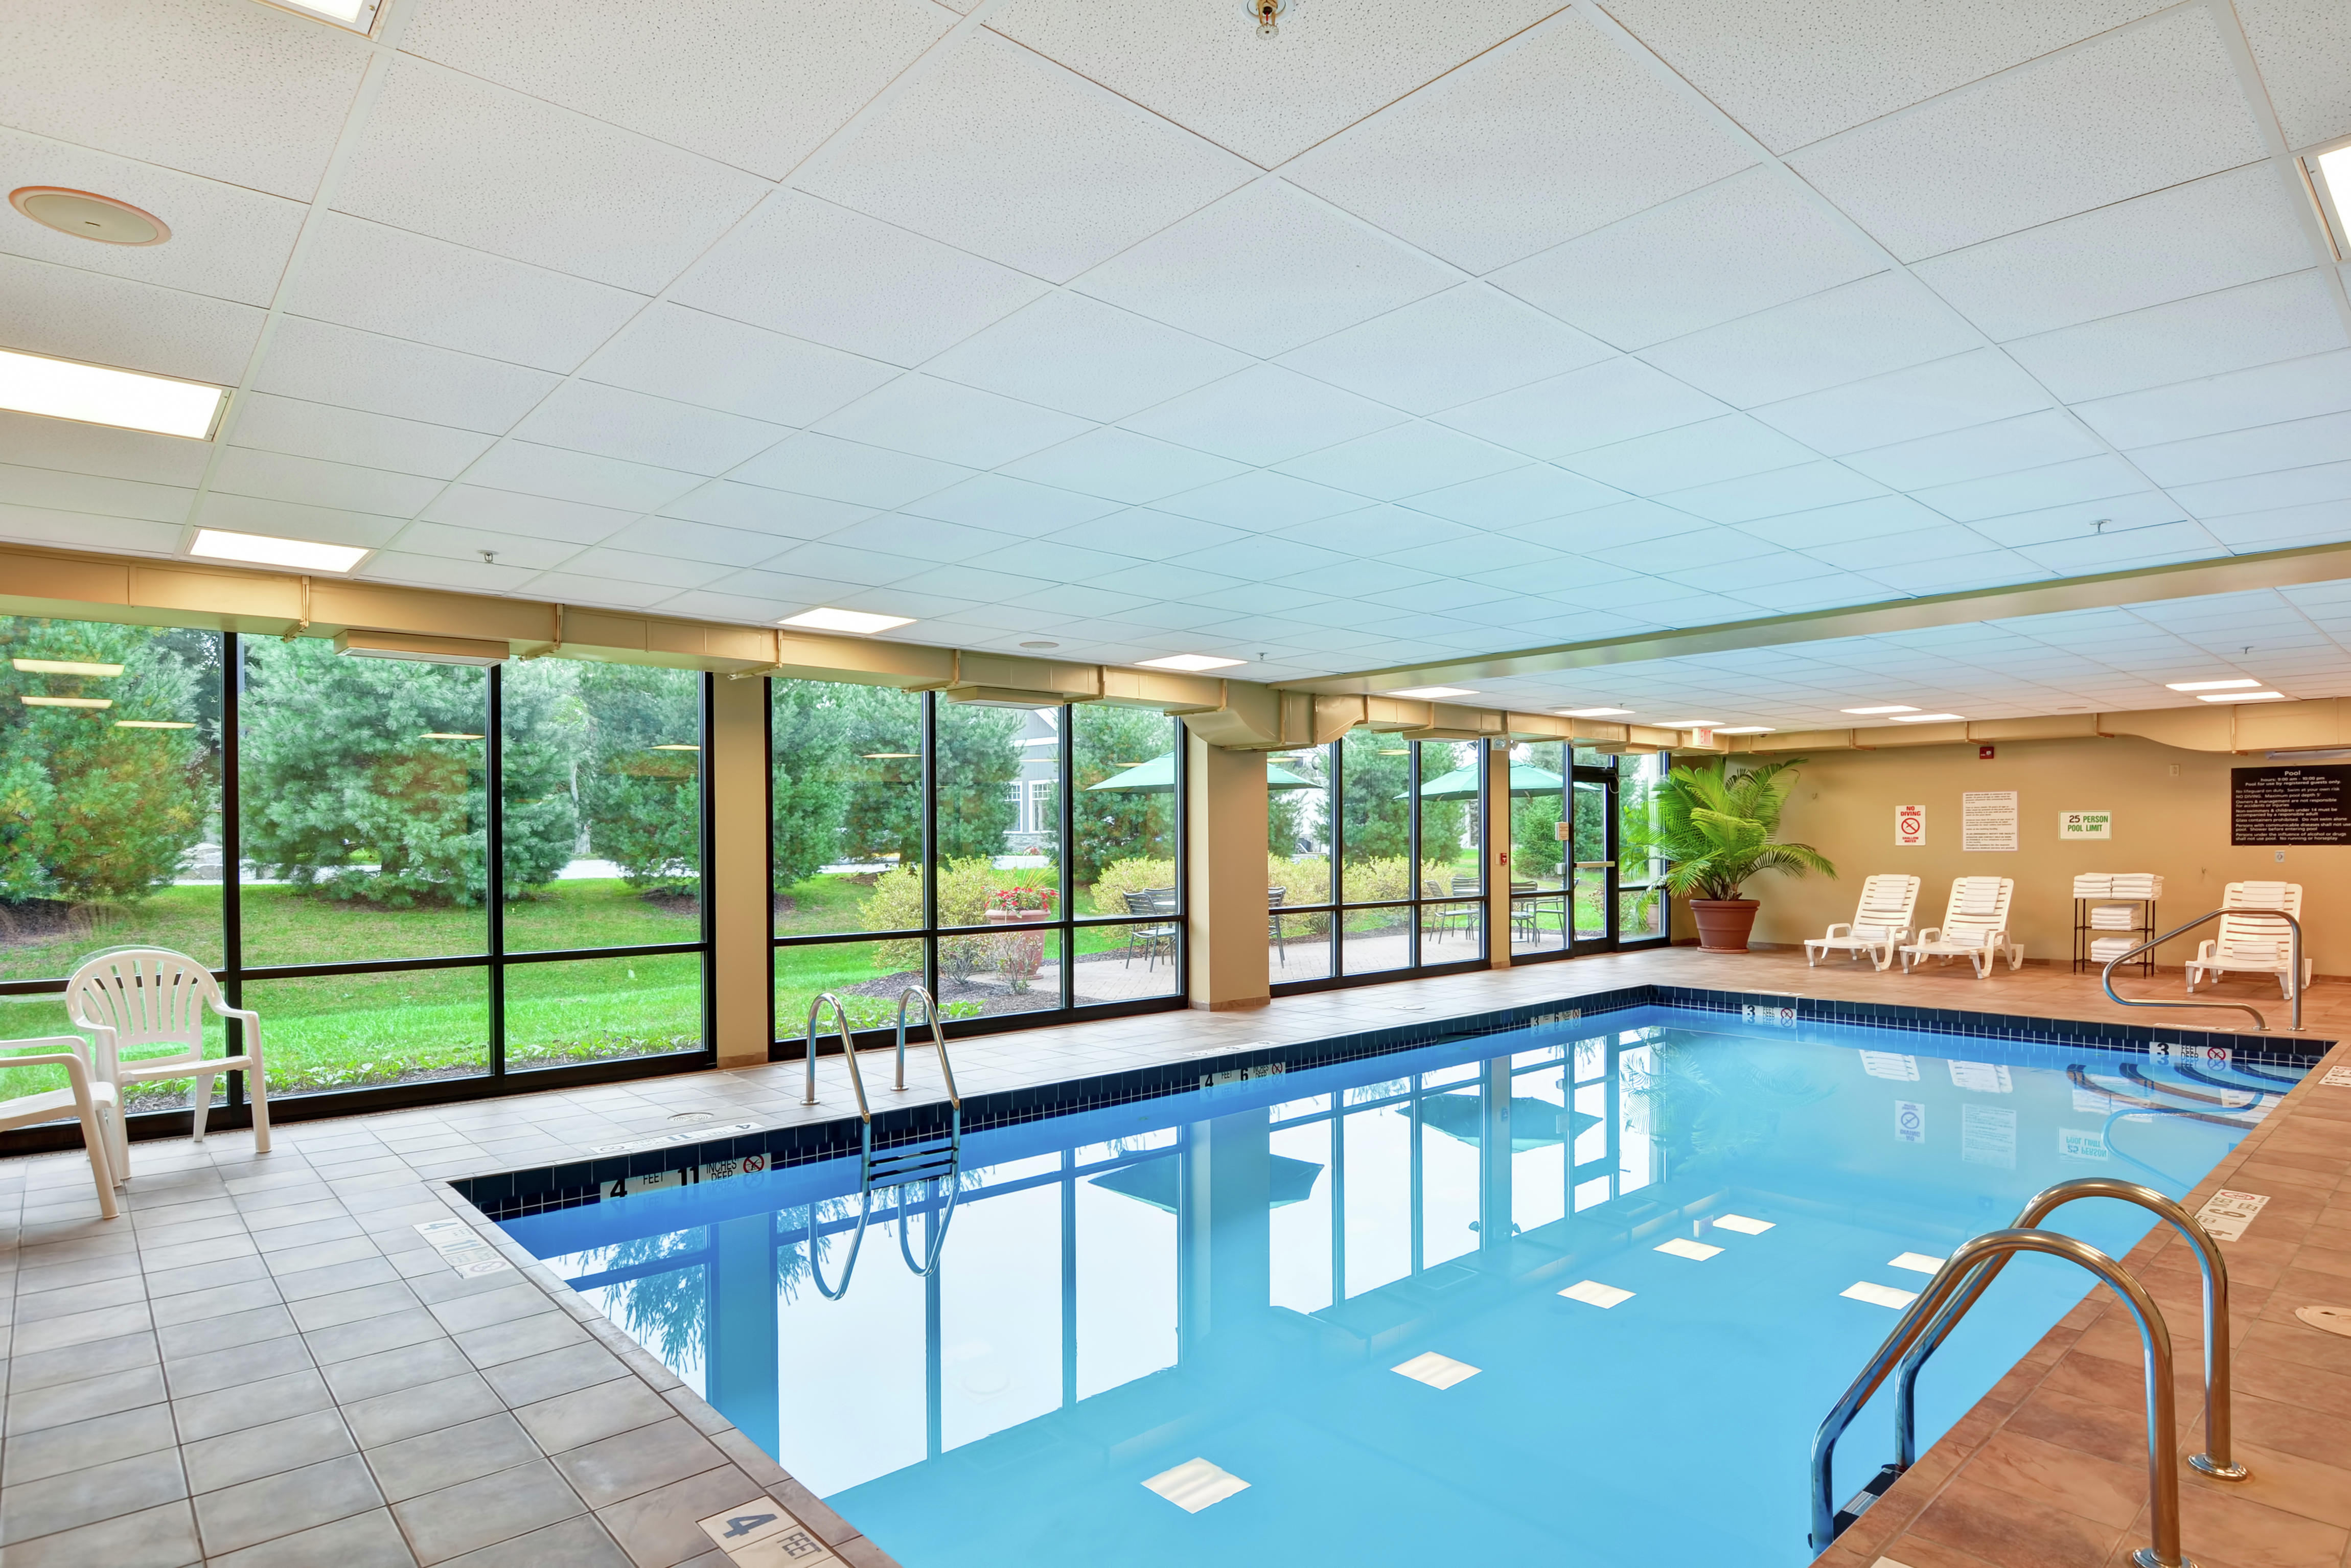 Indoor Swimming Pool Area with Large Windows and Lounge Chairs